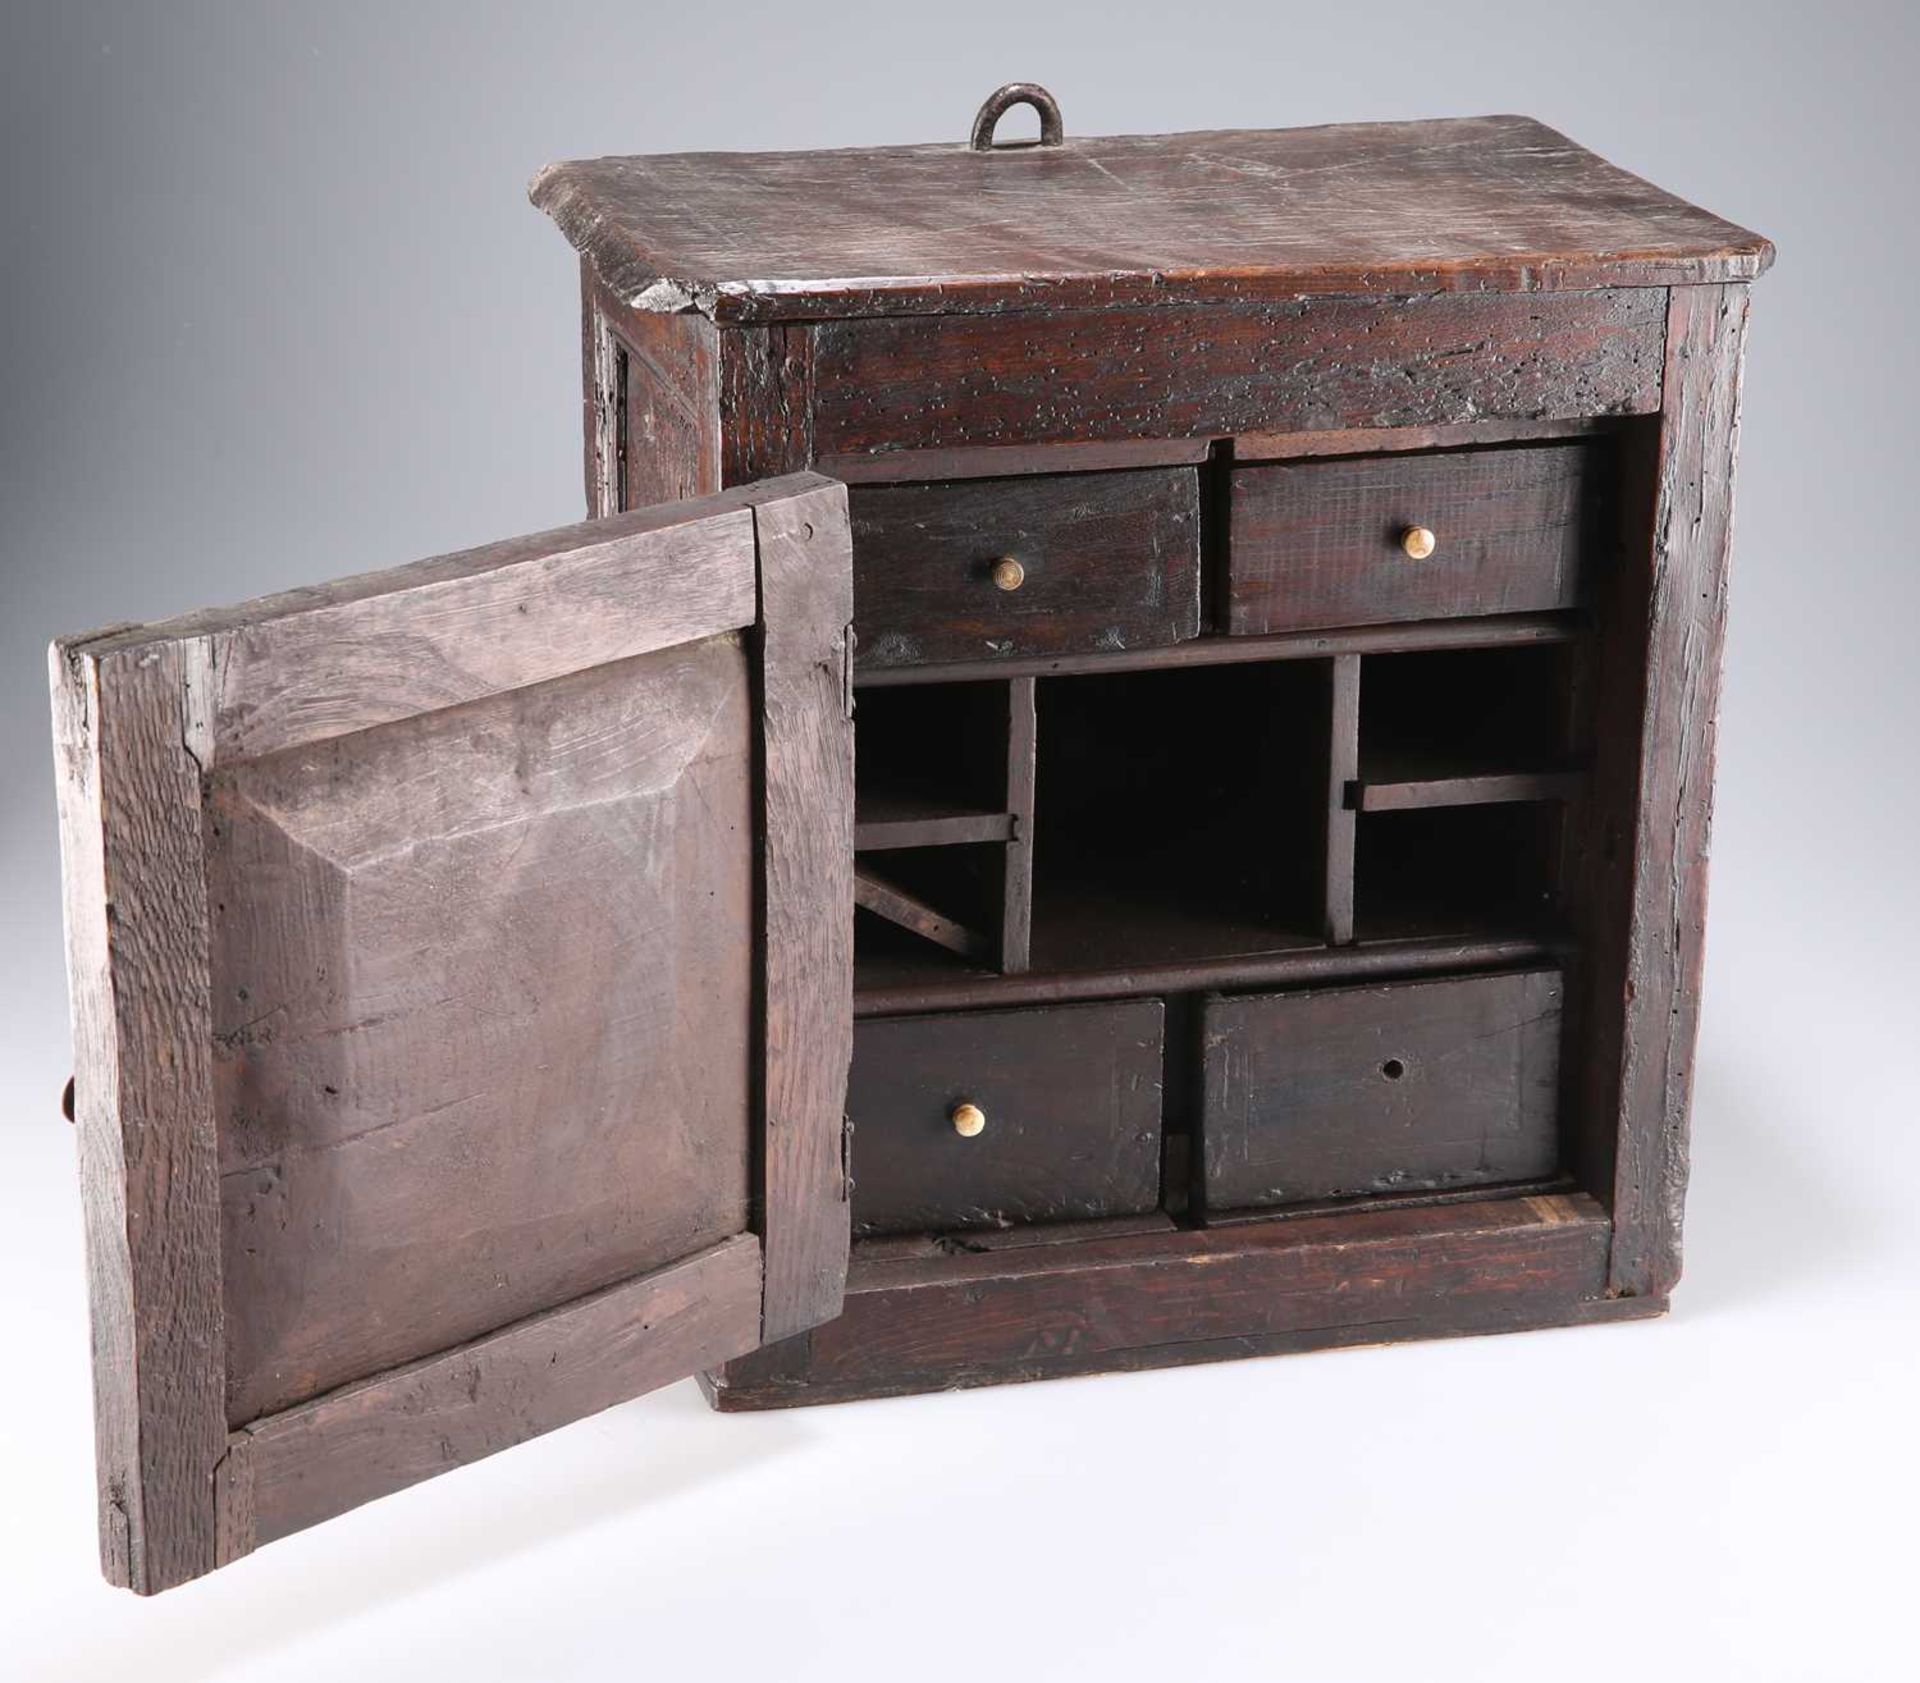 AN OAK SPICE CUPBOARD, LATE 17TH/EARLY 18TH CENTURY - Image 2 of 4